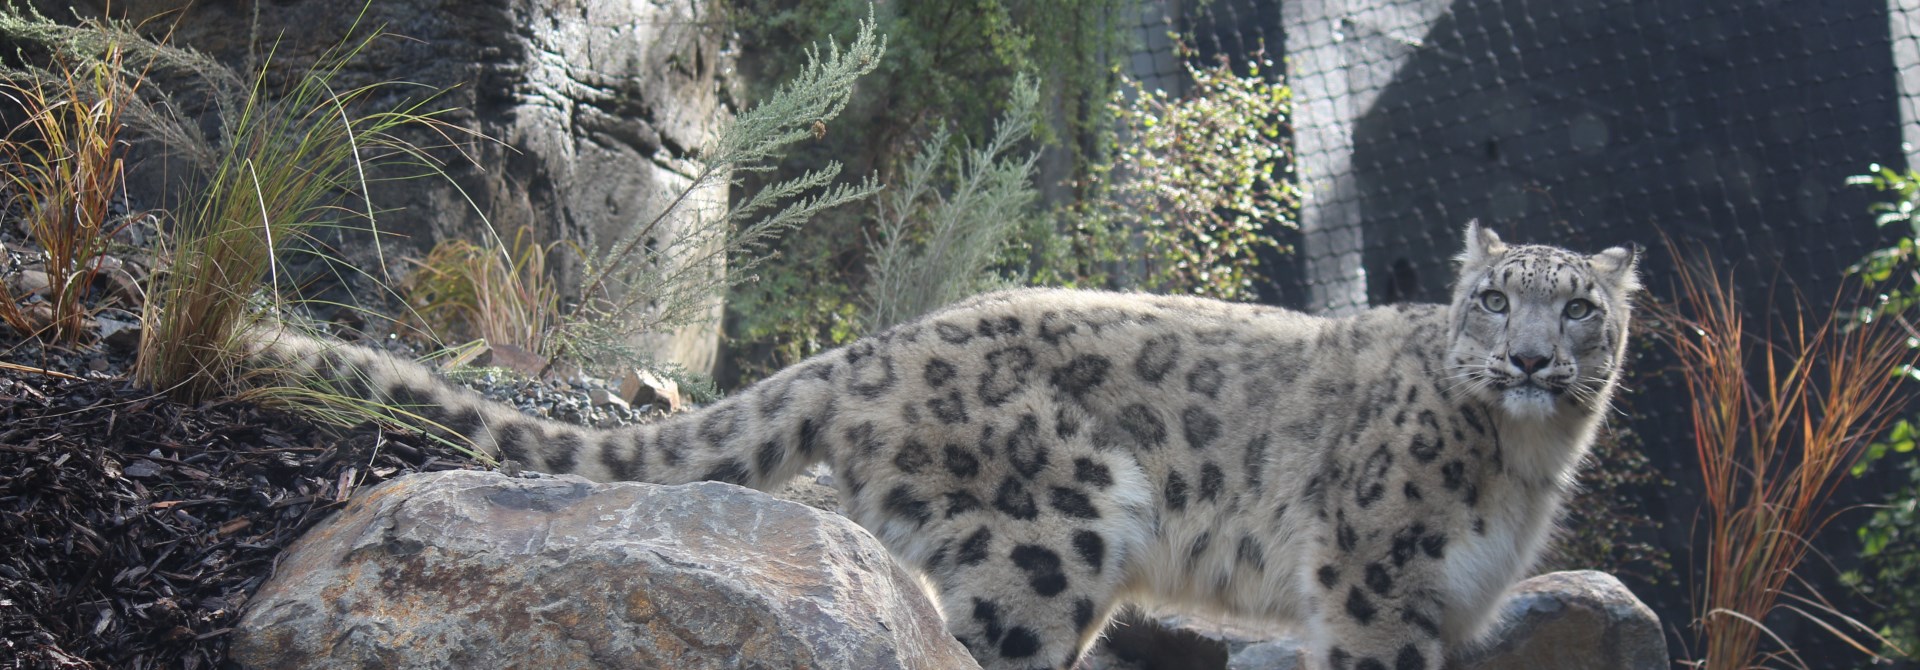 Snow Leopard at the Zoo standing on a rock.